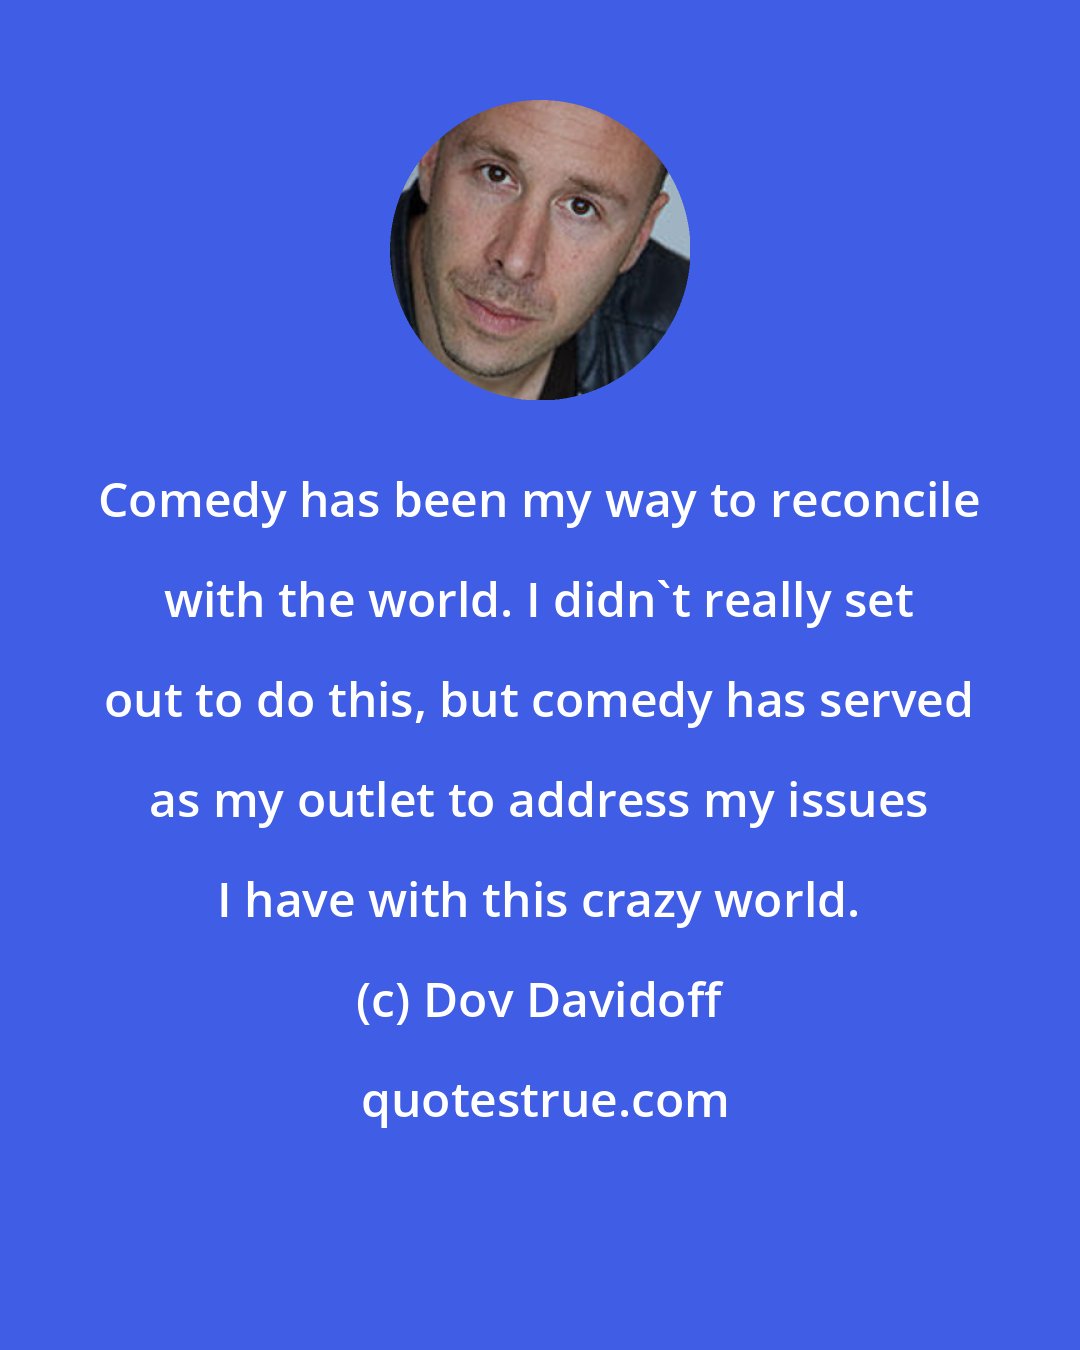 Dov Davidoff: Comedy has been my way to reconcile with the world. I didn't really set out to do this, but comedy has served as my outlet to address my issues I have with this crazy world.